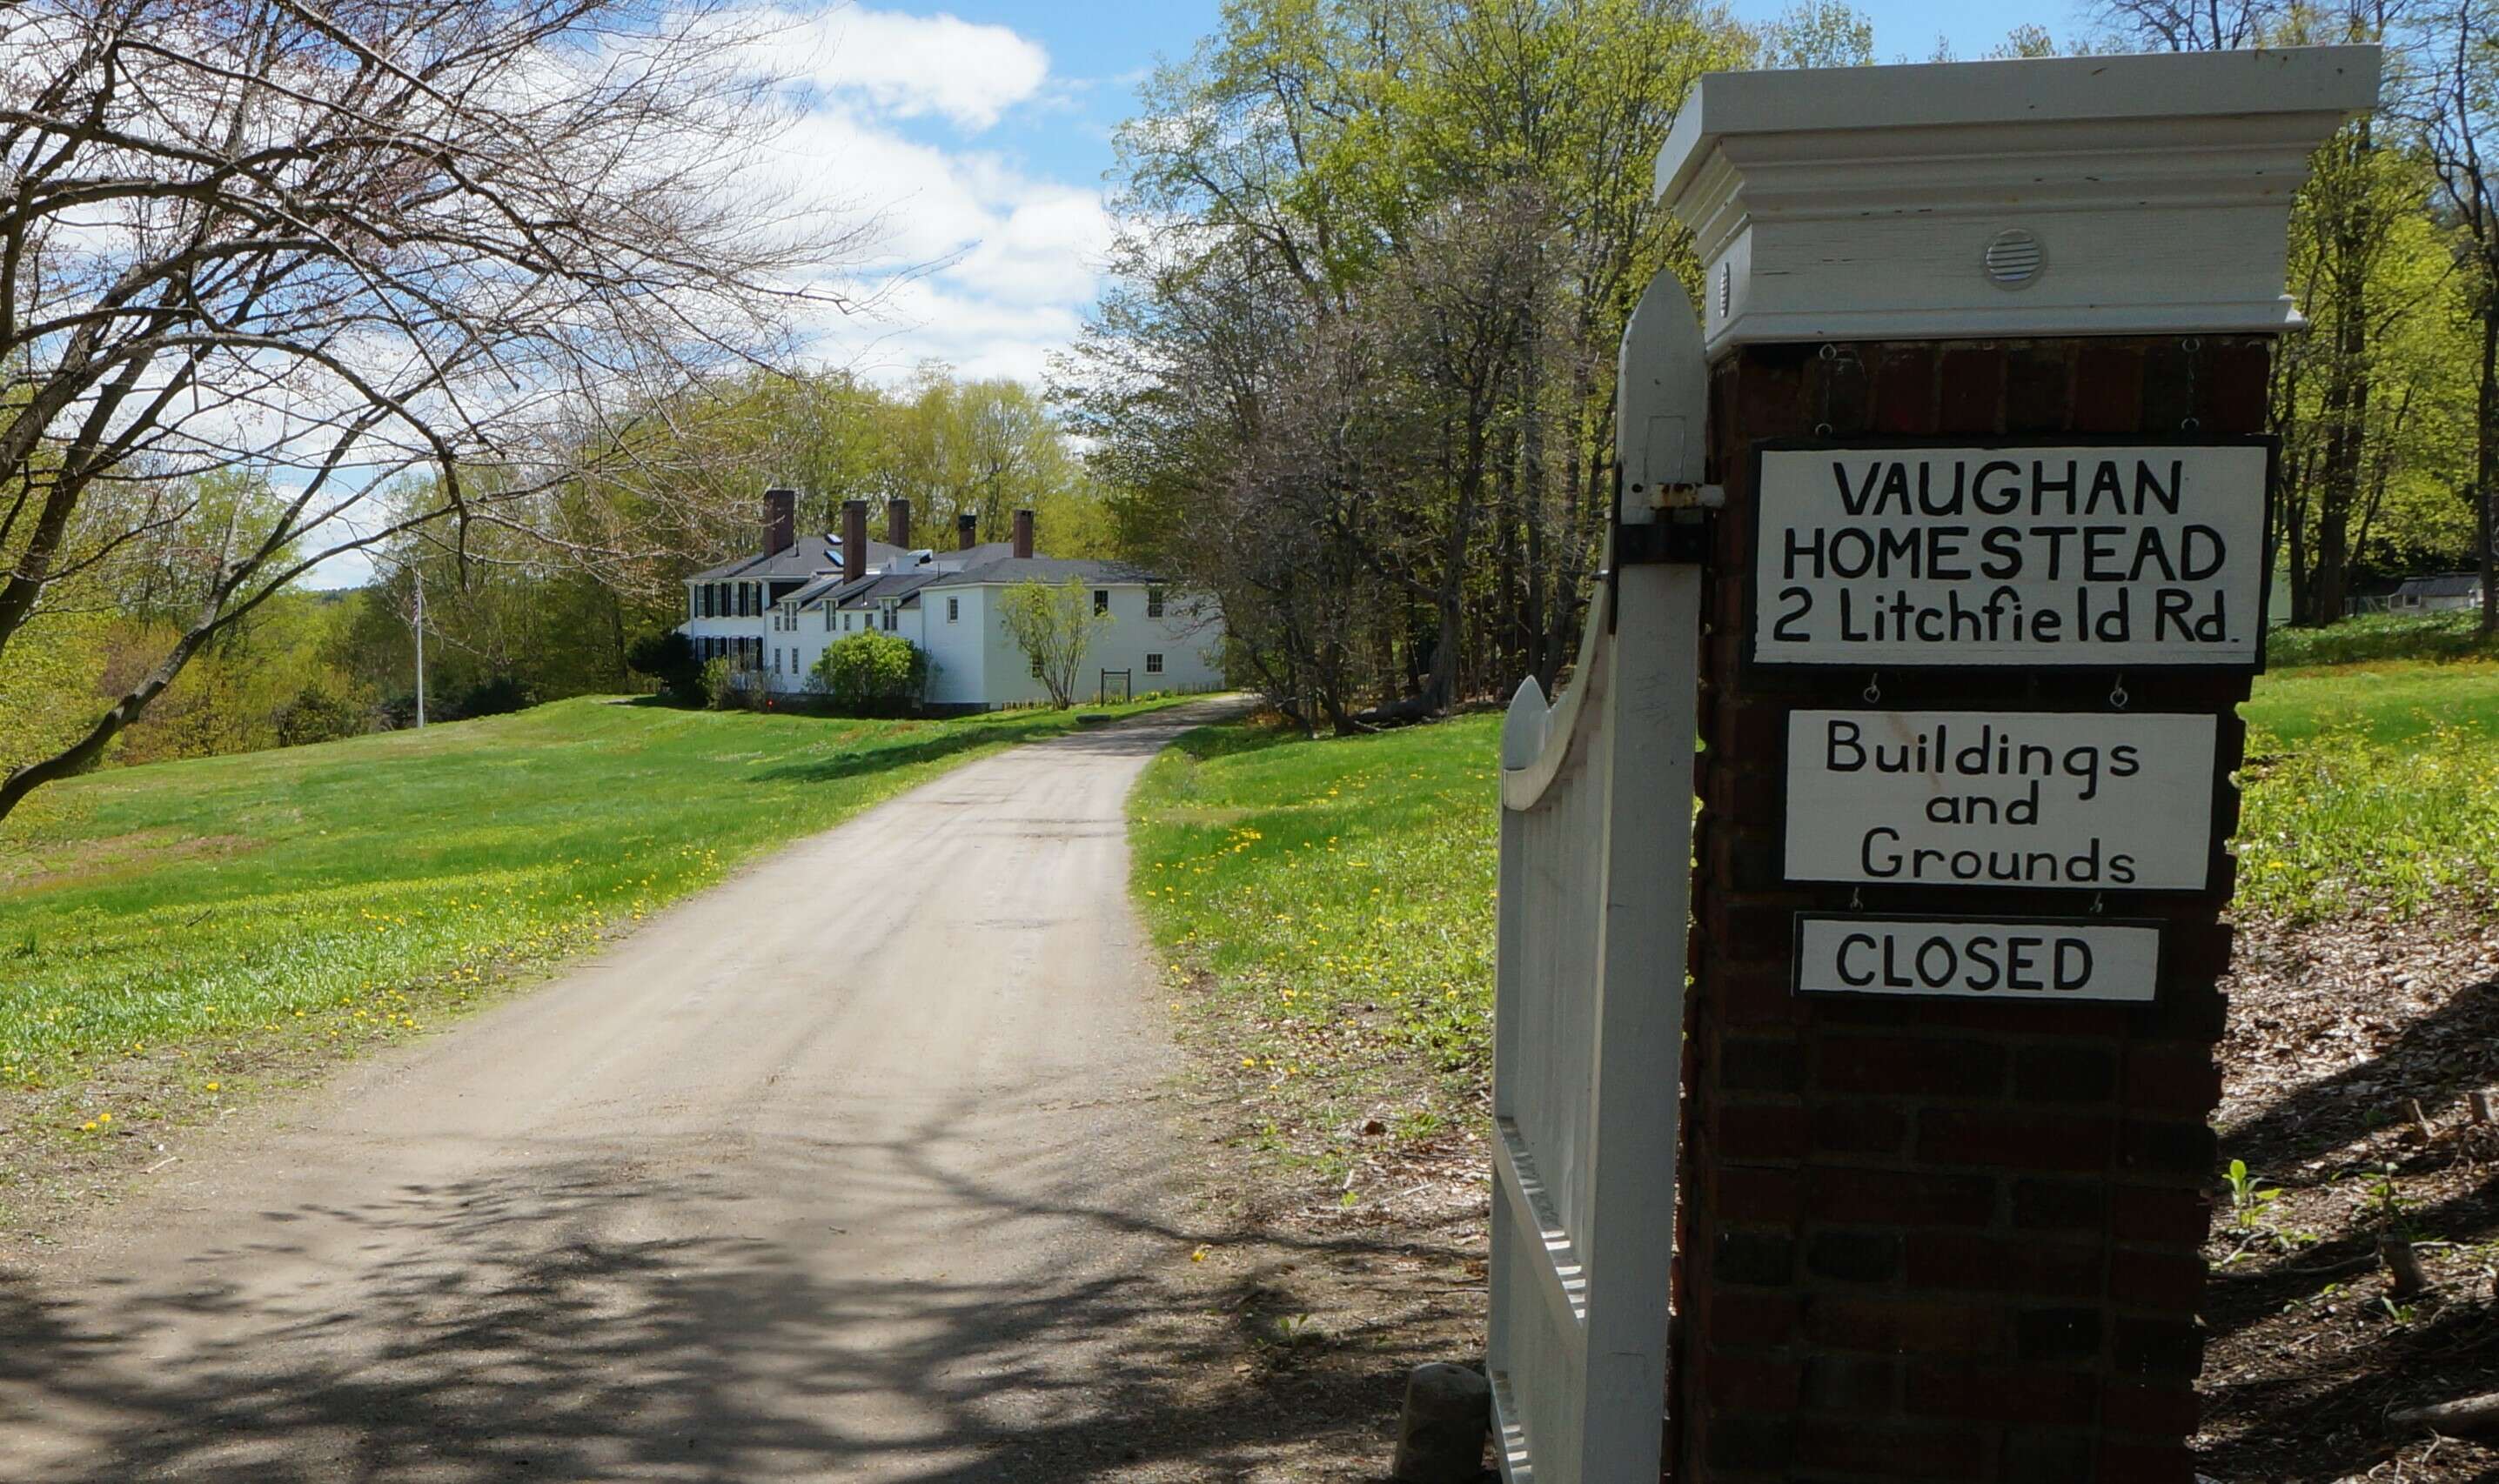 A gate with a painted sign says Vaughn Homestead and Woods 2 Litchfield road a long drive winds down to a large white colonial house on a grassy lawn